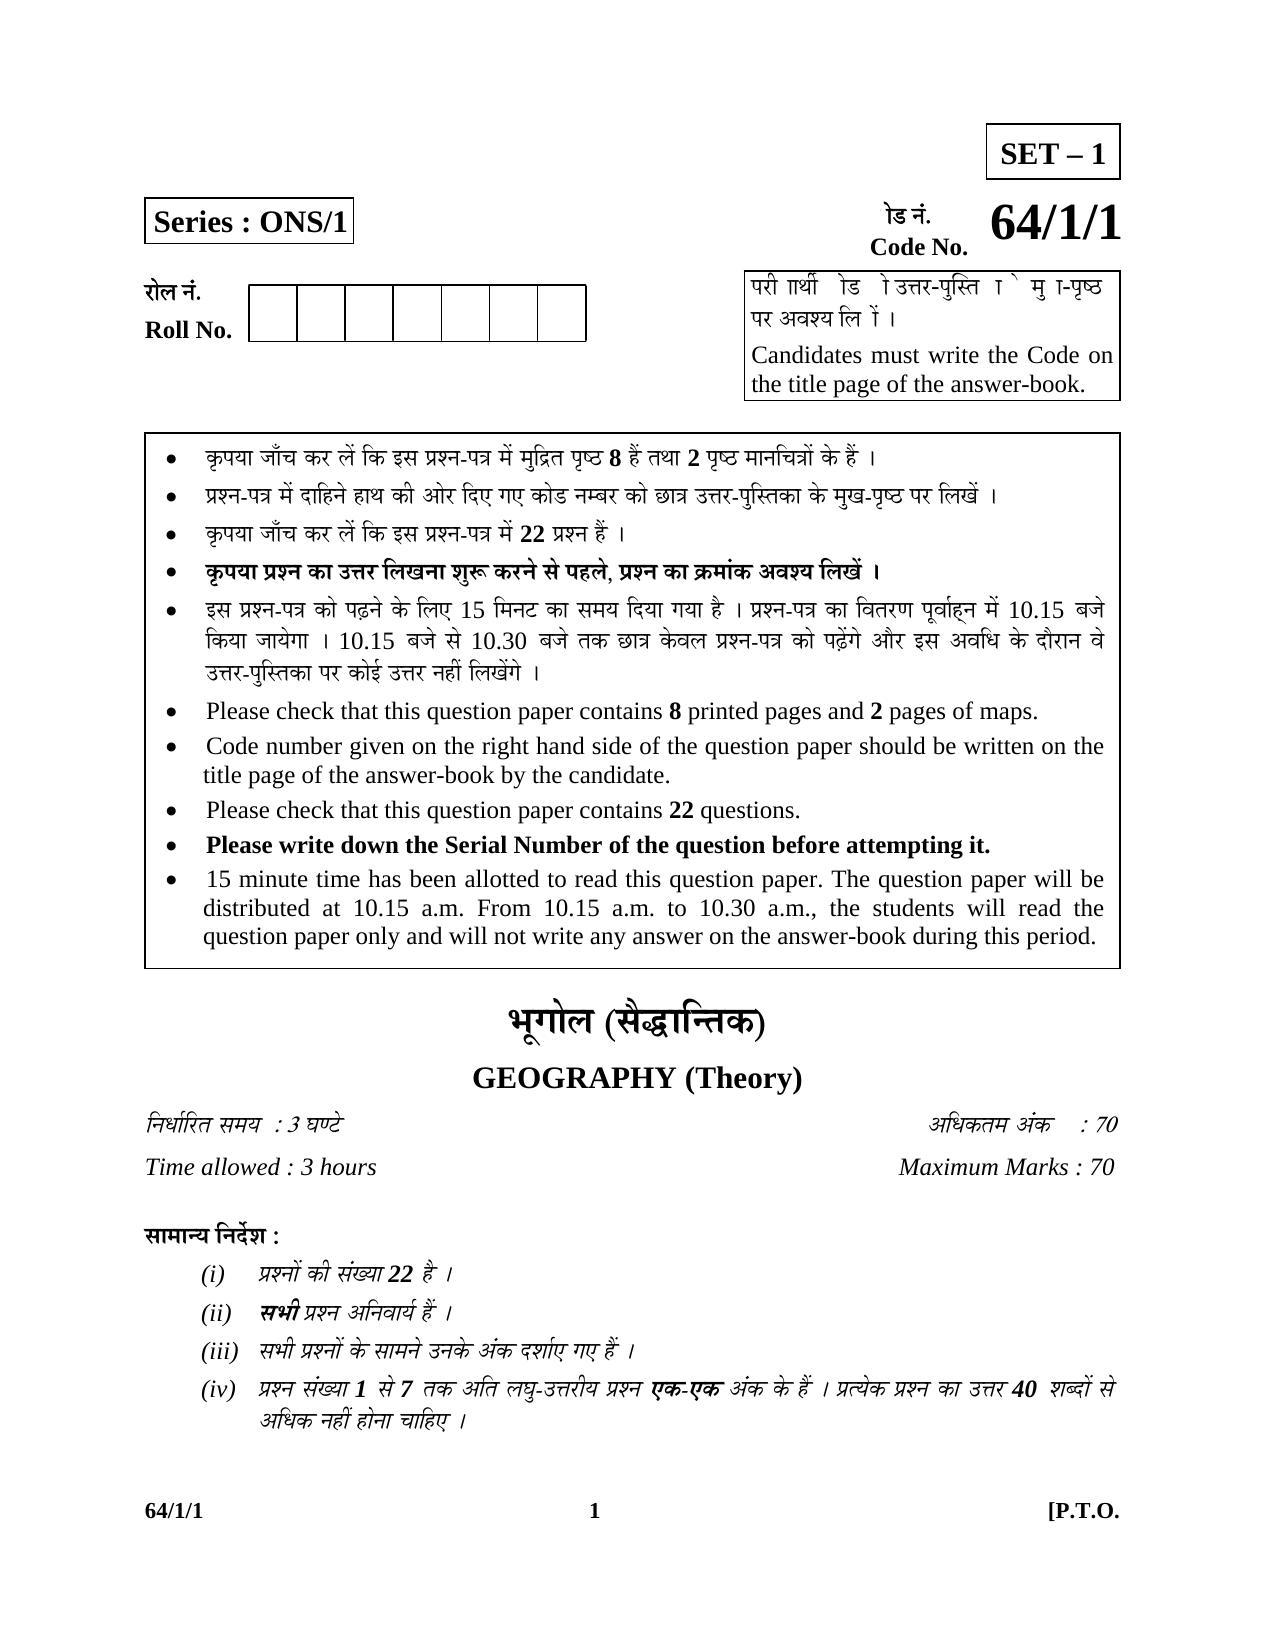 CBSE Class 12 64-1-1 GEOGRAPHY 2016 Question Paper - Page 1